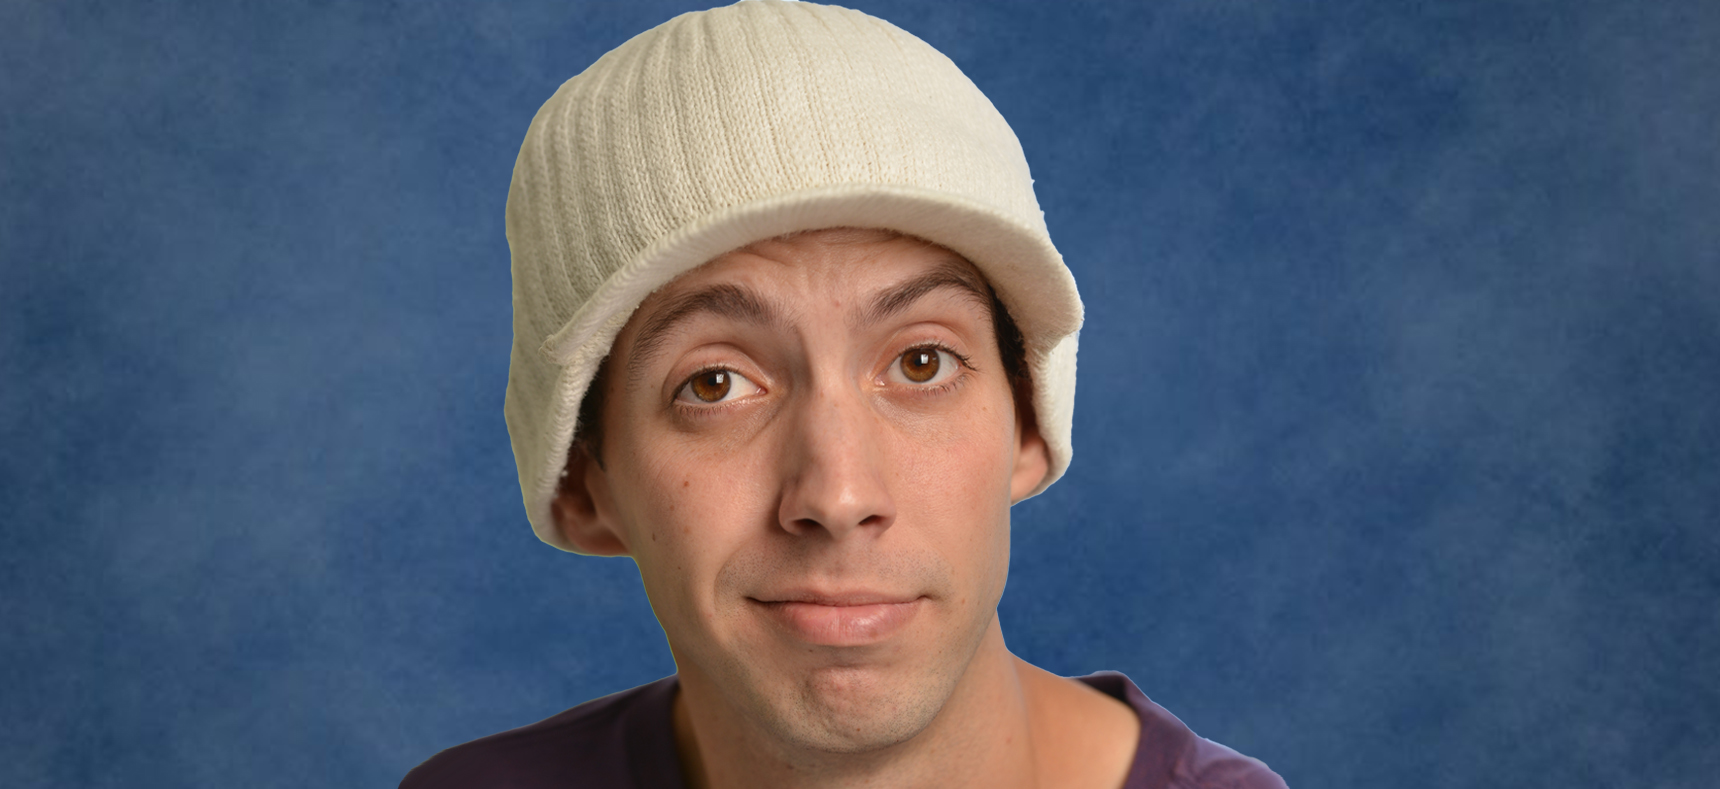 Daniel Eachus comes to Comedy Heights at Bay Bridge Brewing this Friday night!